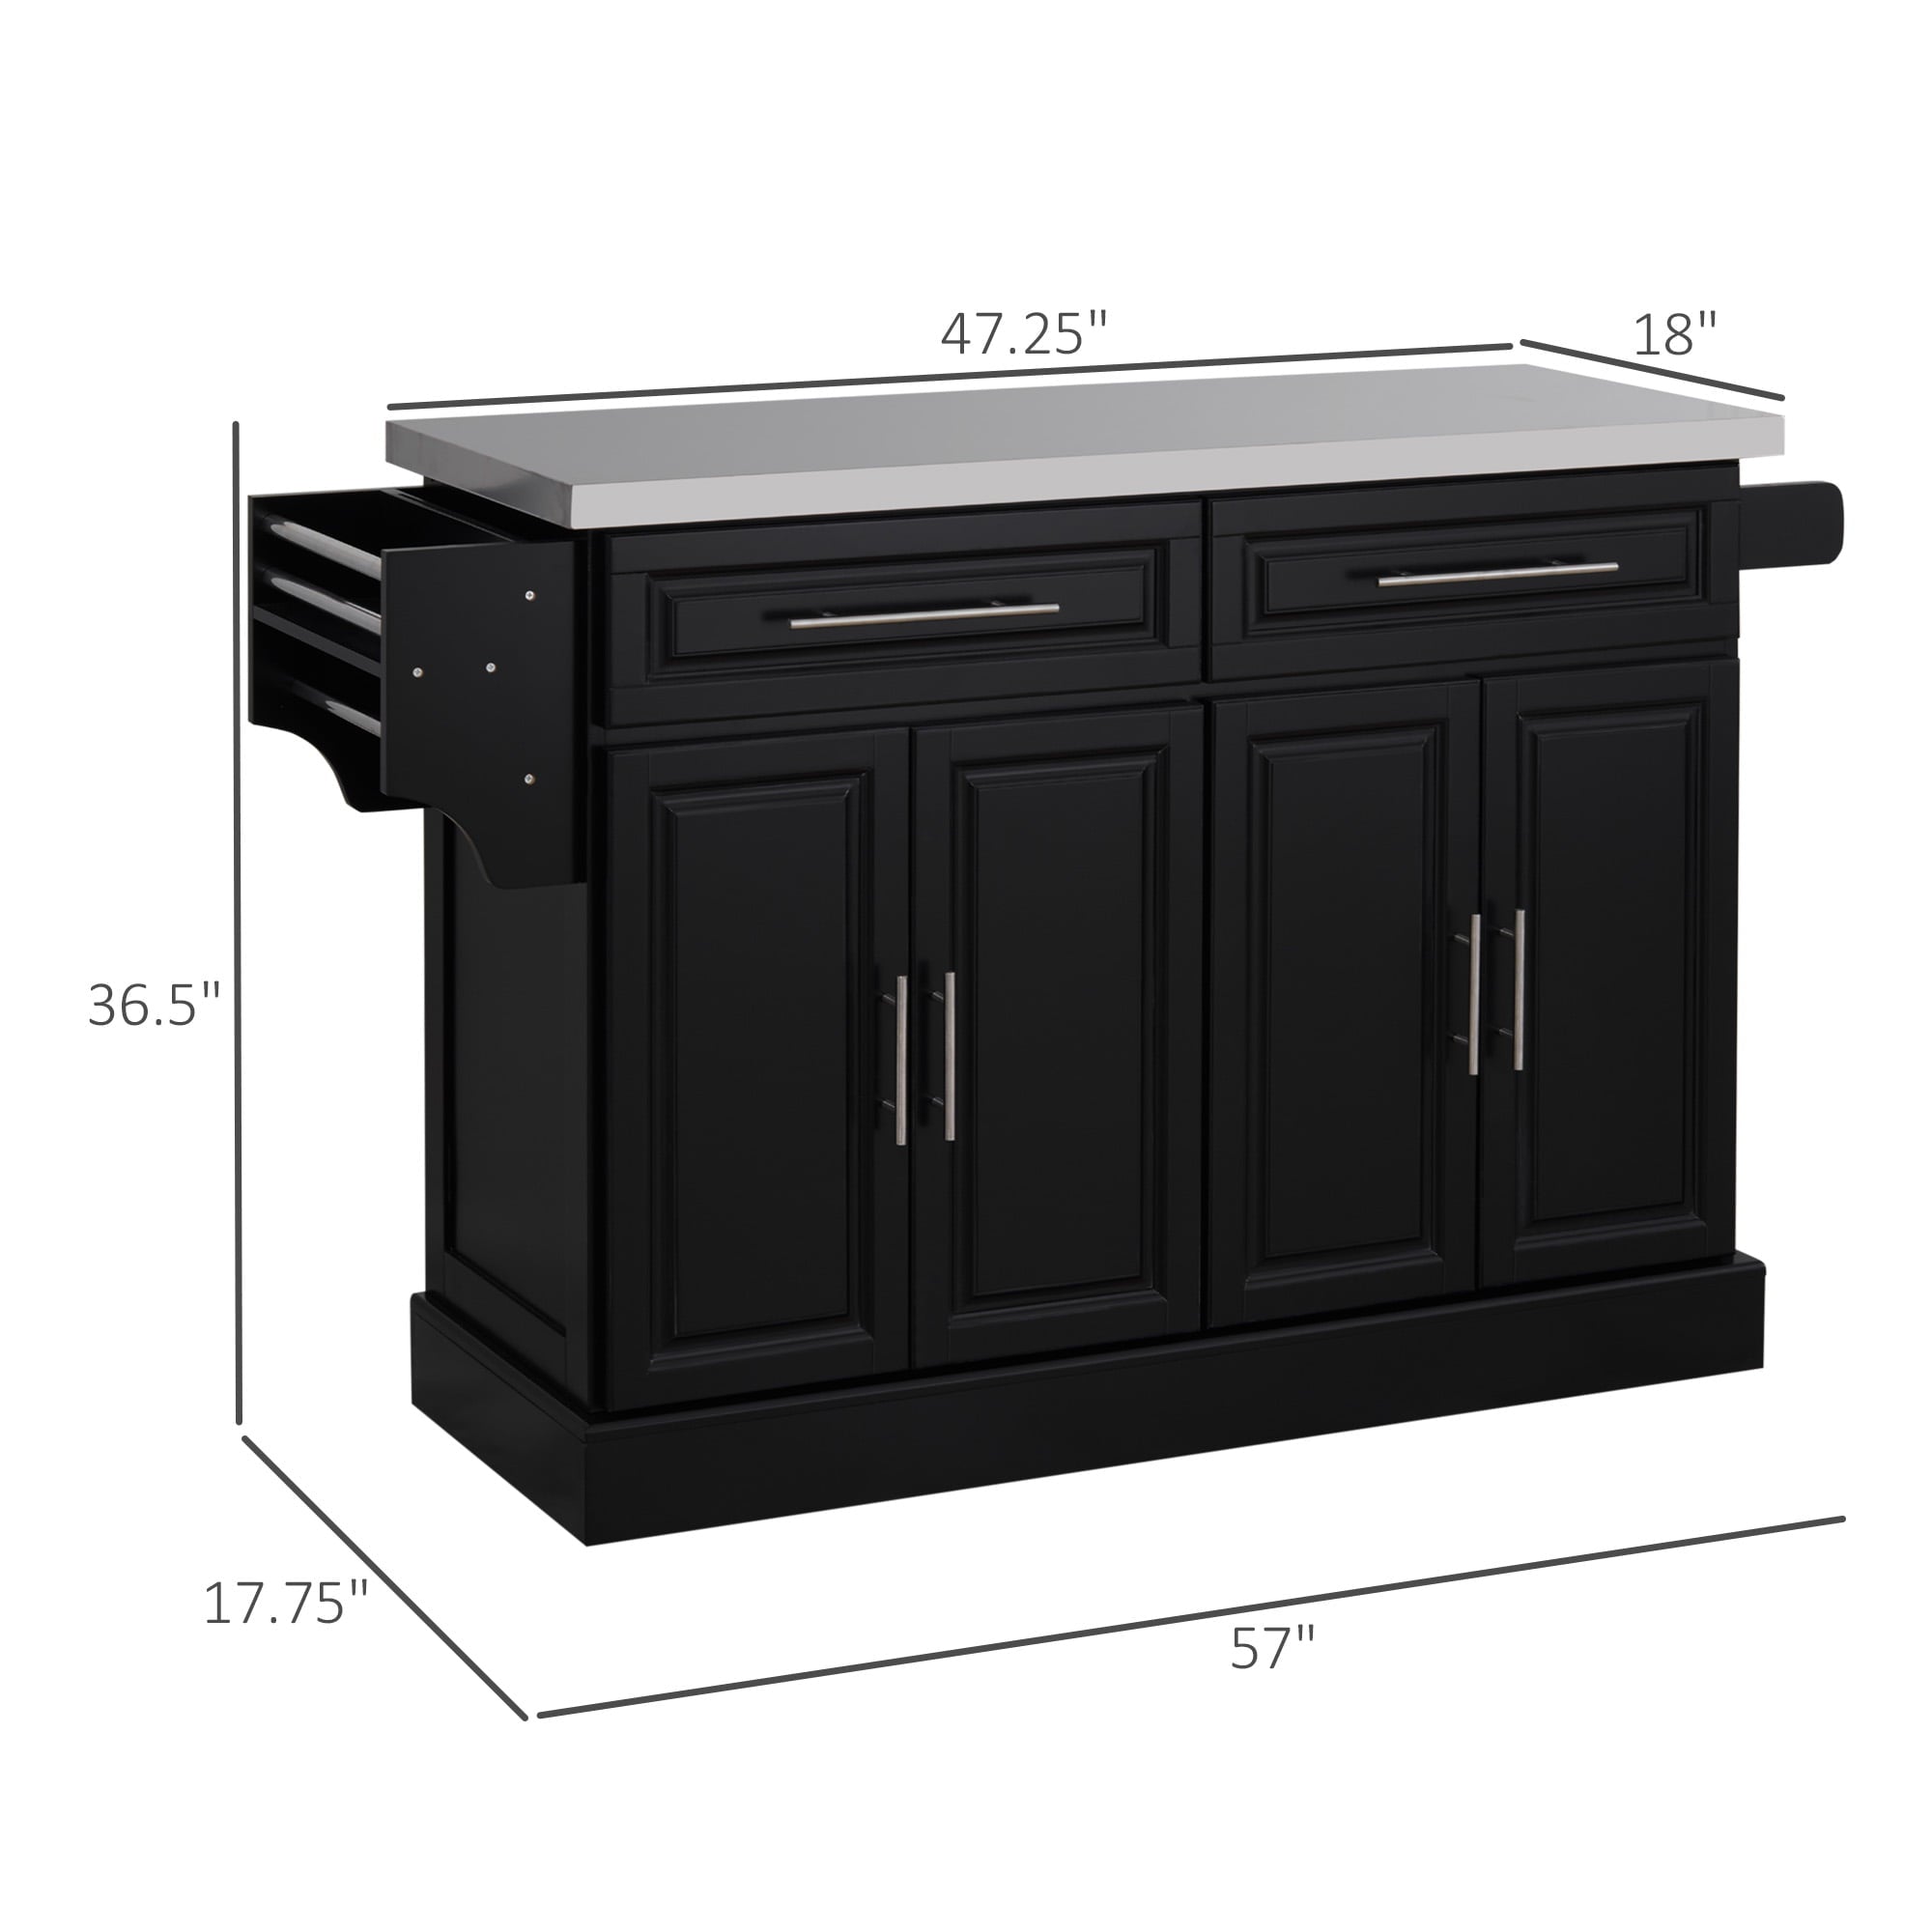 HOMCOM Rolling Kitchen Island Cart with Cabinets and Drawers， Black